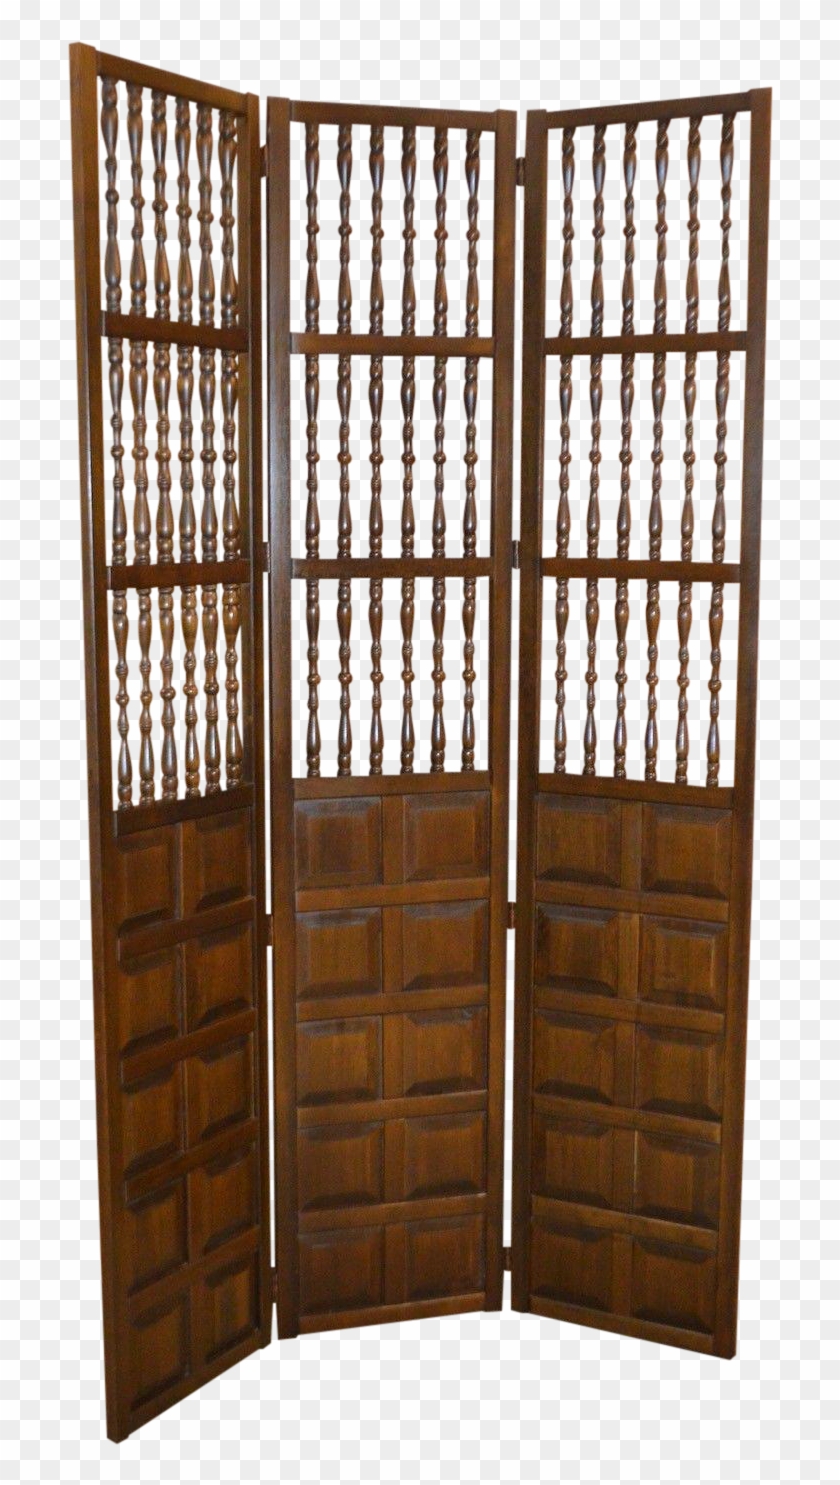 Vintage Jacobean Style Wood Room Divider On Chairish - Room Divider Clipart #3298515